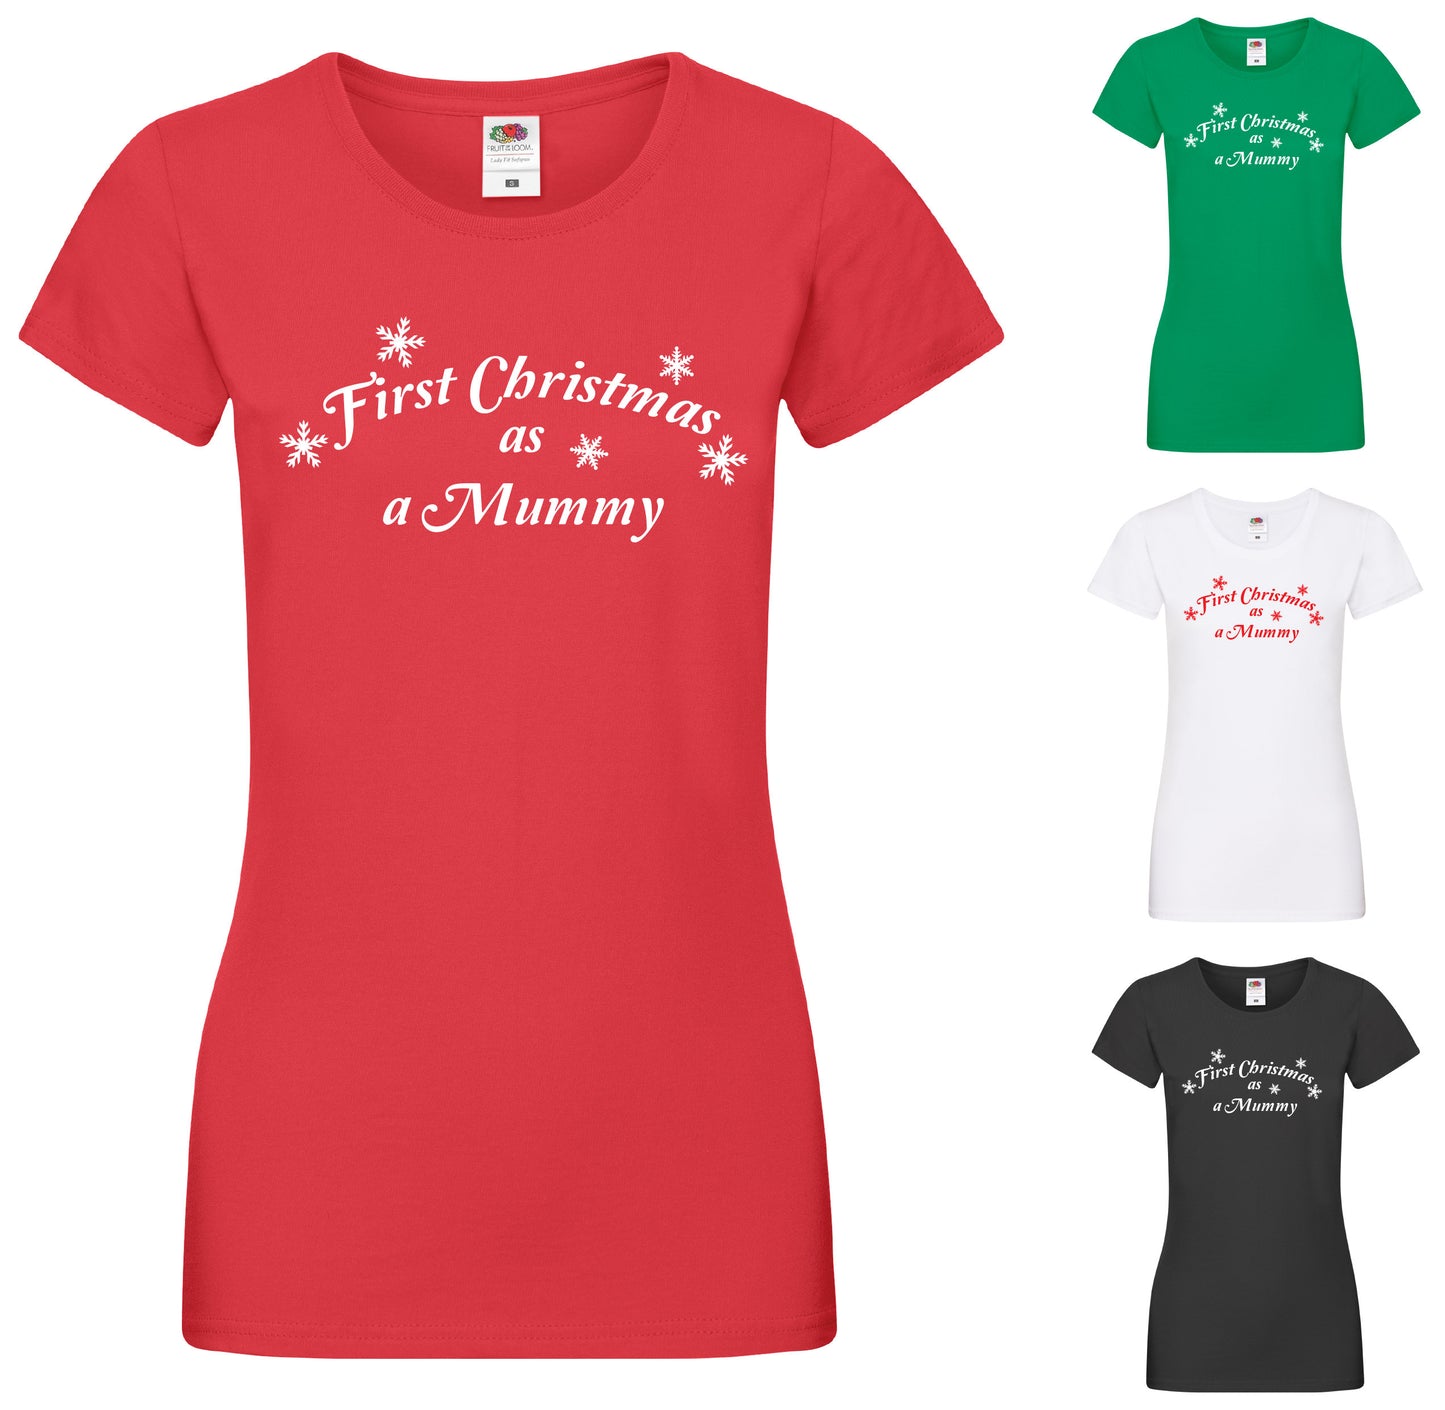 First Christmas as a Mummy T-Shirt - White or Red Print - Can be changed to Mum or Mommy or any other variations